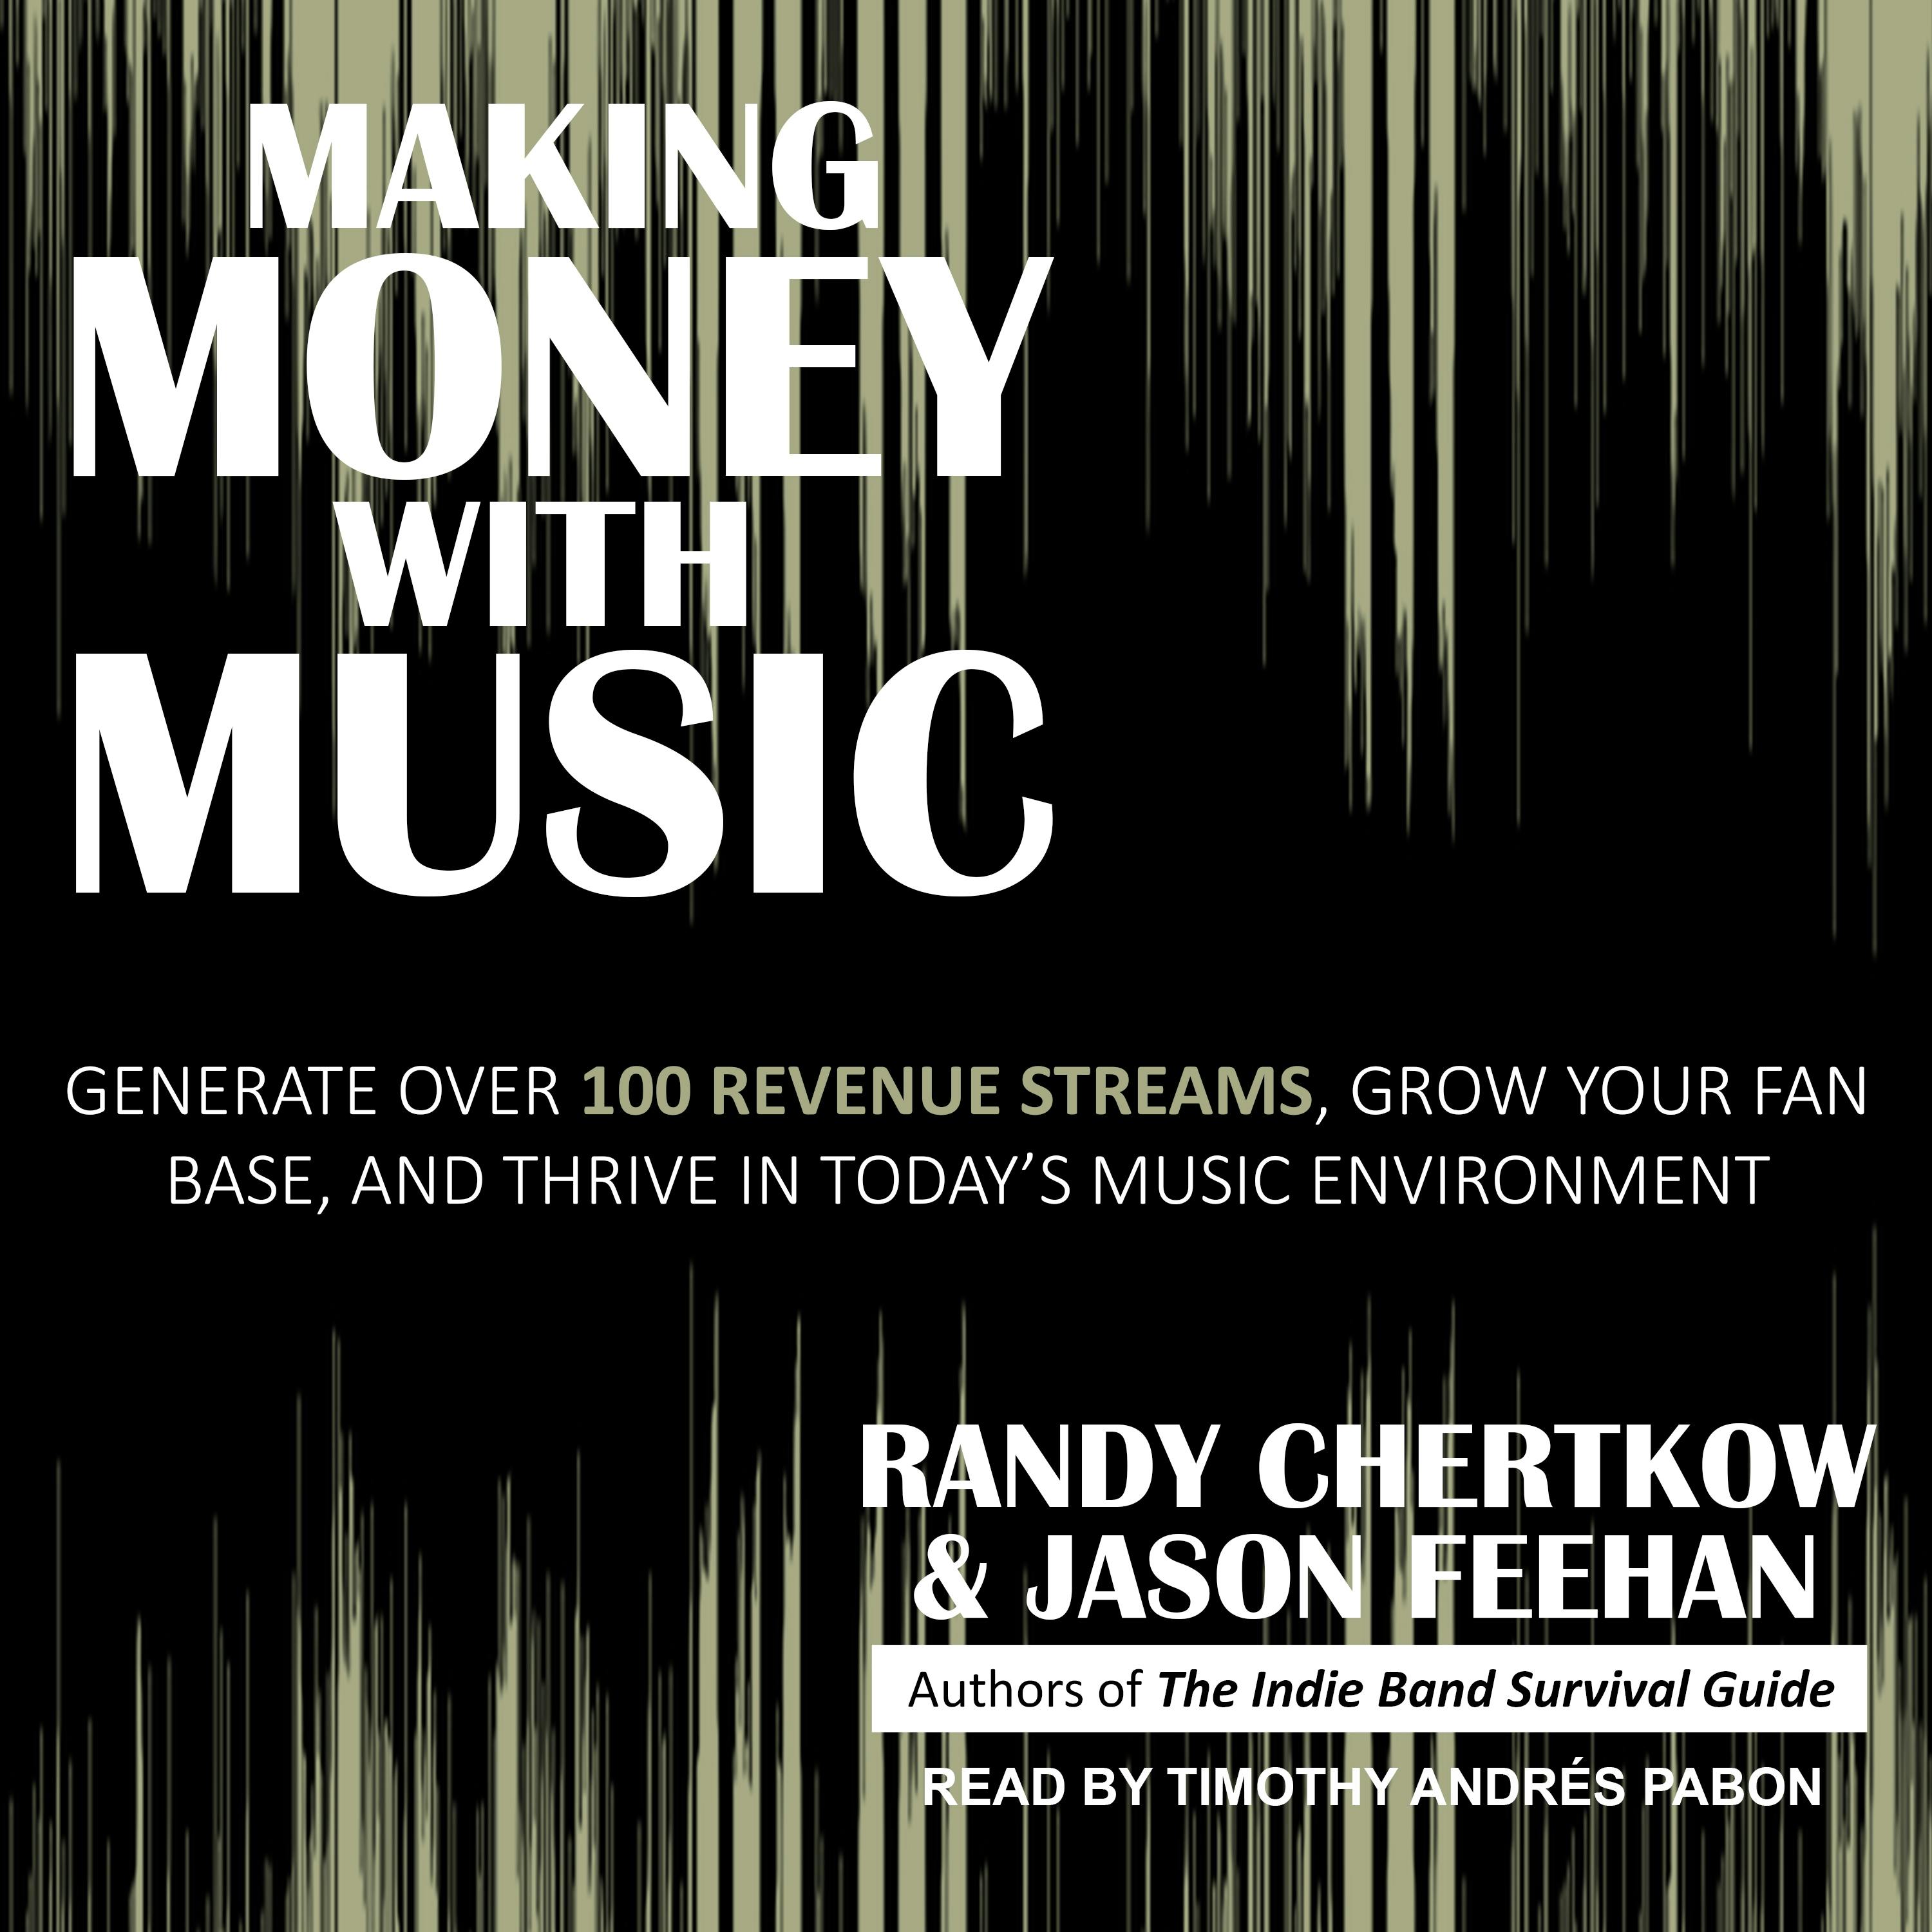 Making Money with Music: Generate Over 100 Revenue Streams, Grow Your Fan Base, and Thrive in Today's Music Environment - Randy Chertkow, Jason Feehan